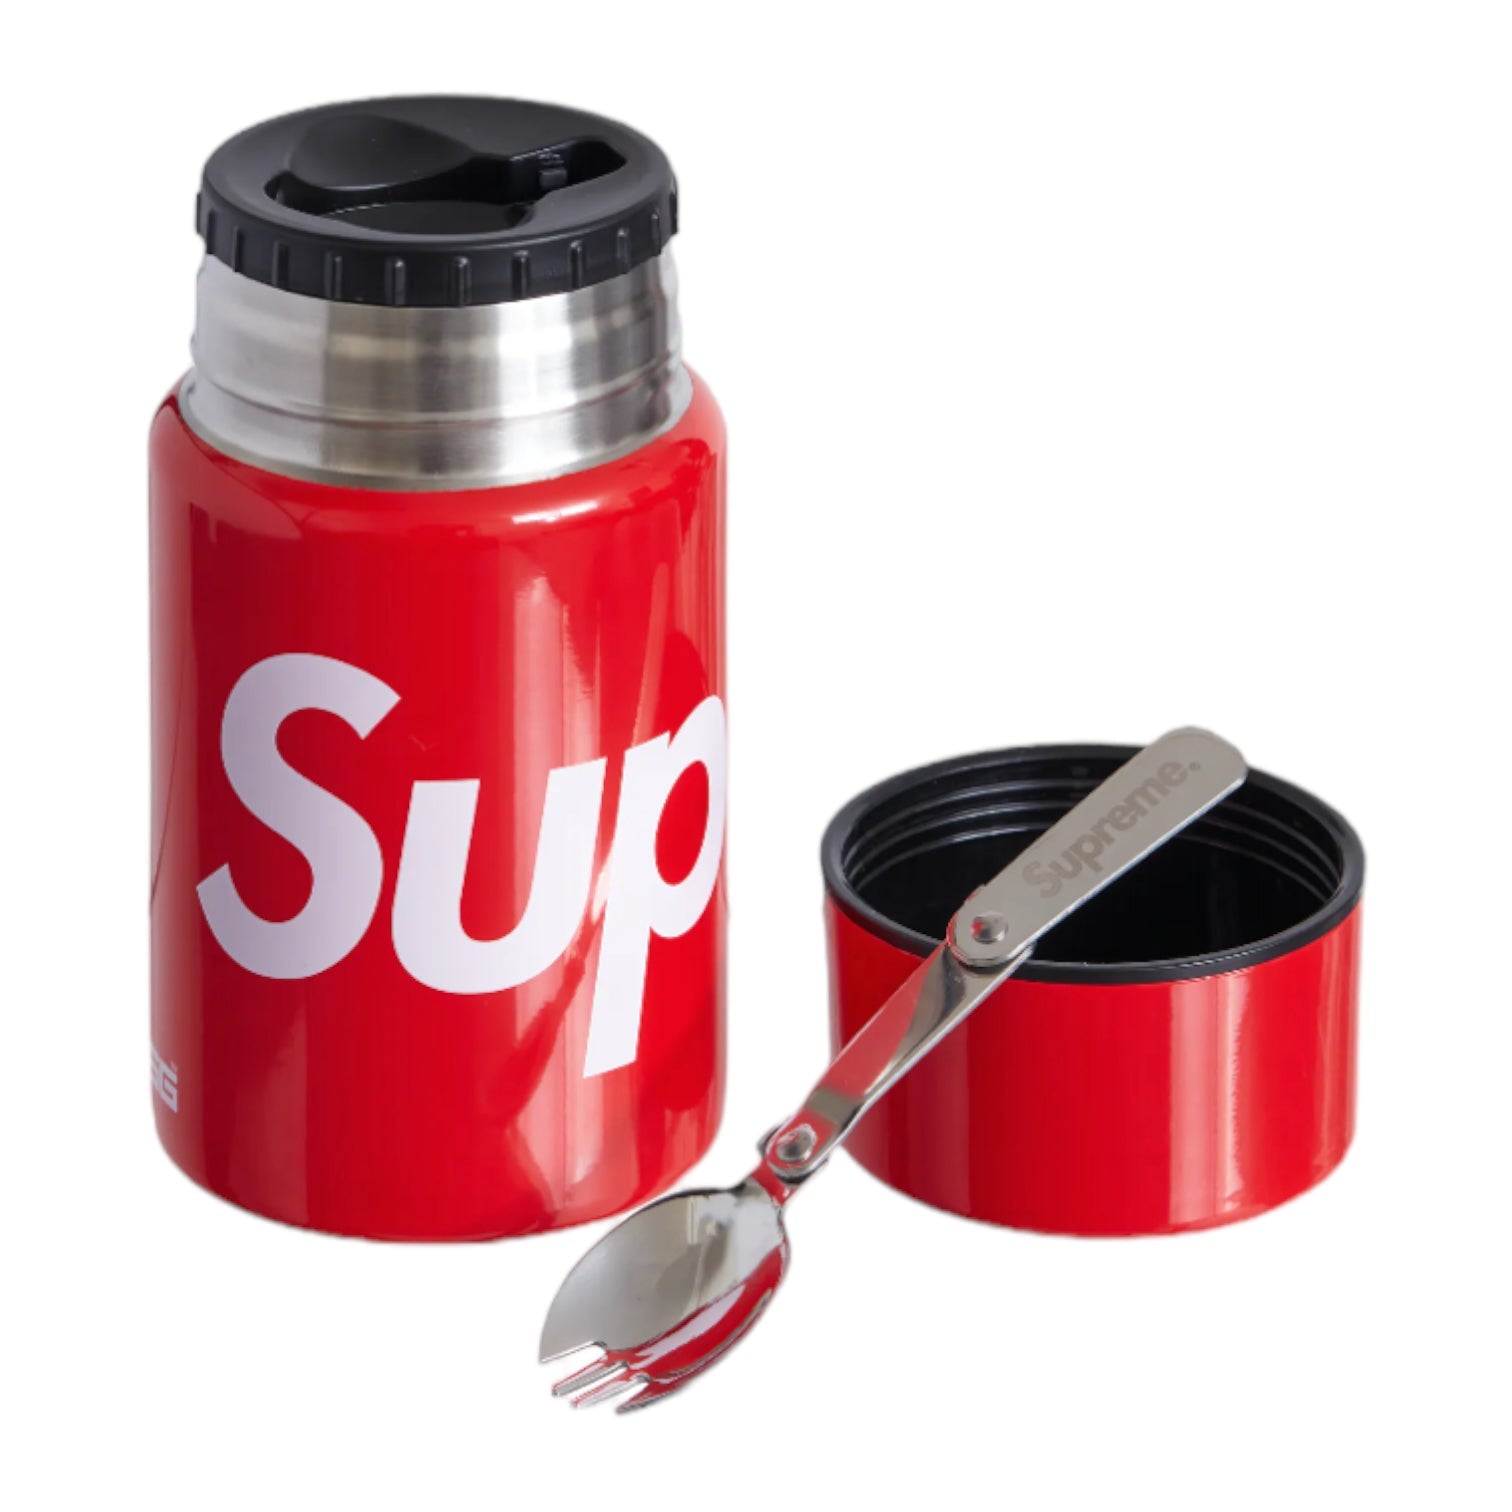 Supreme SIGG 0.75L Food Jar - Red Stainless Steel Container